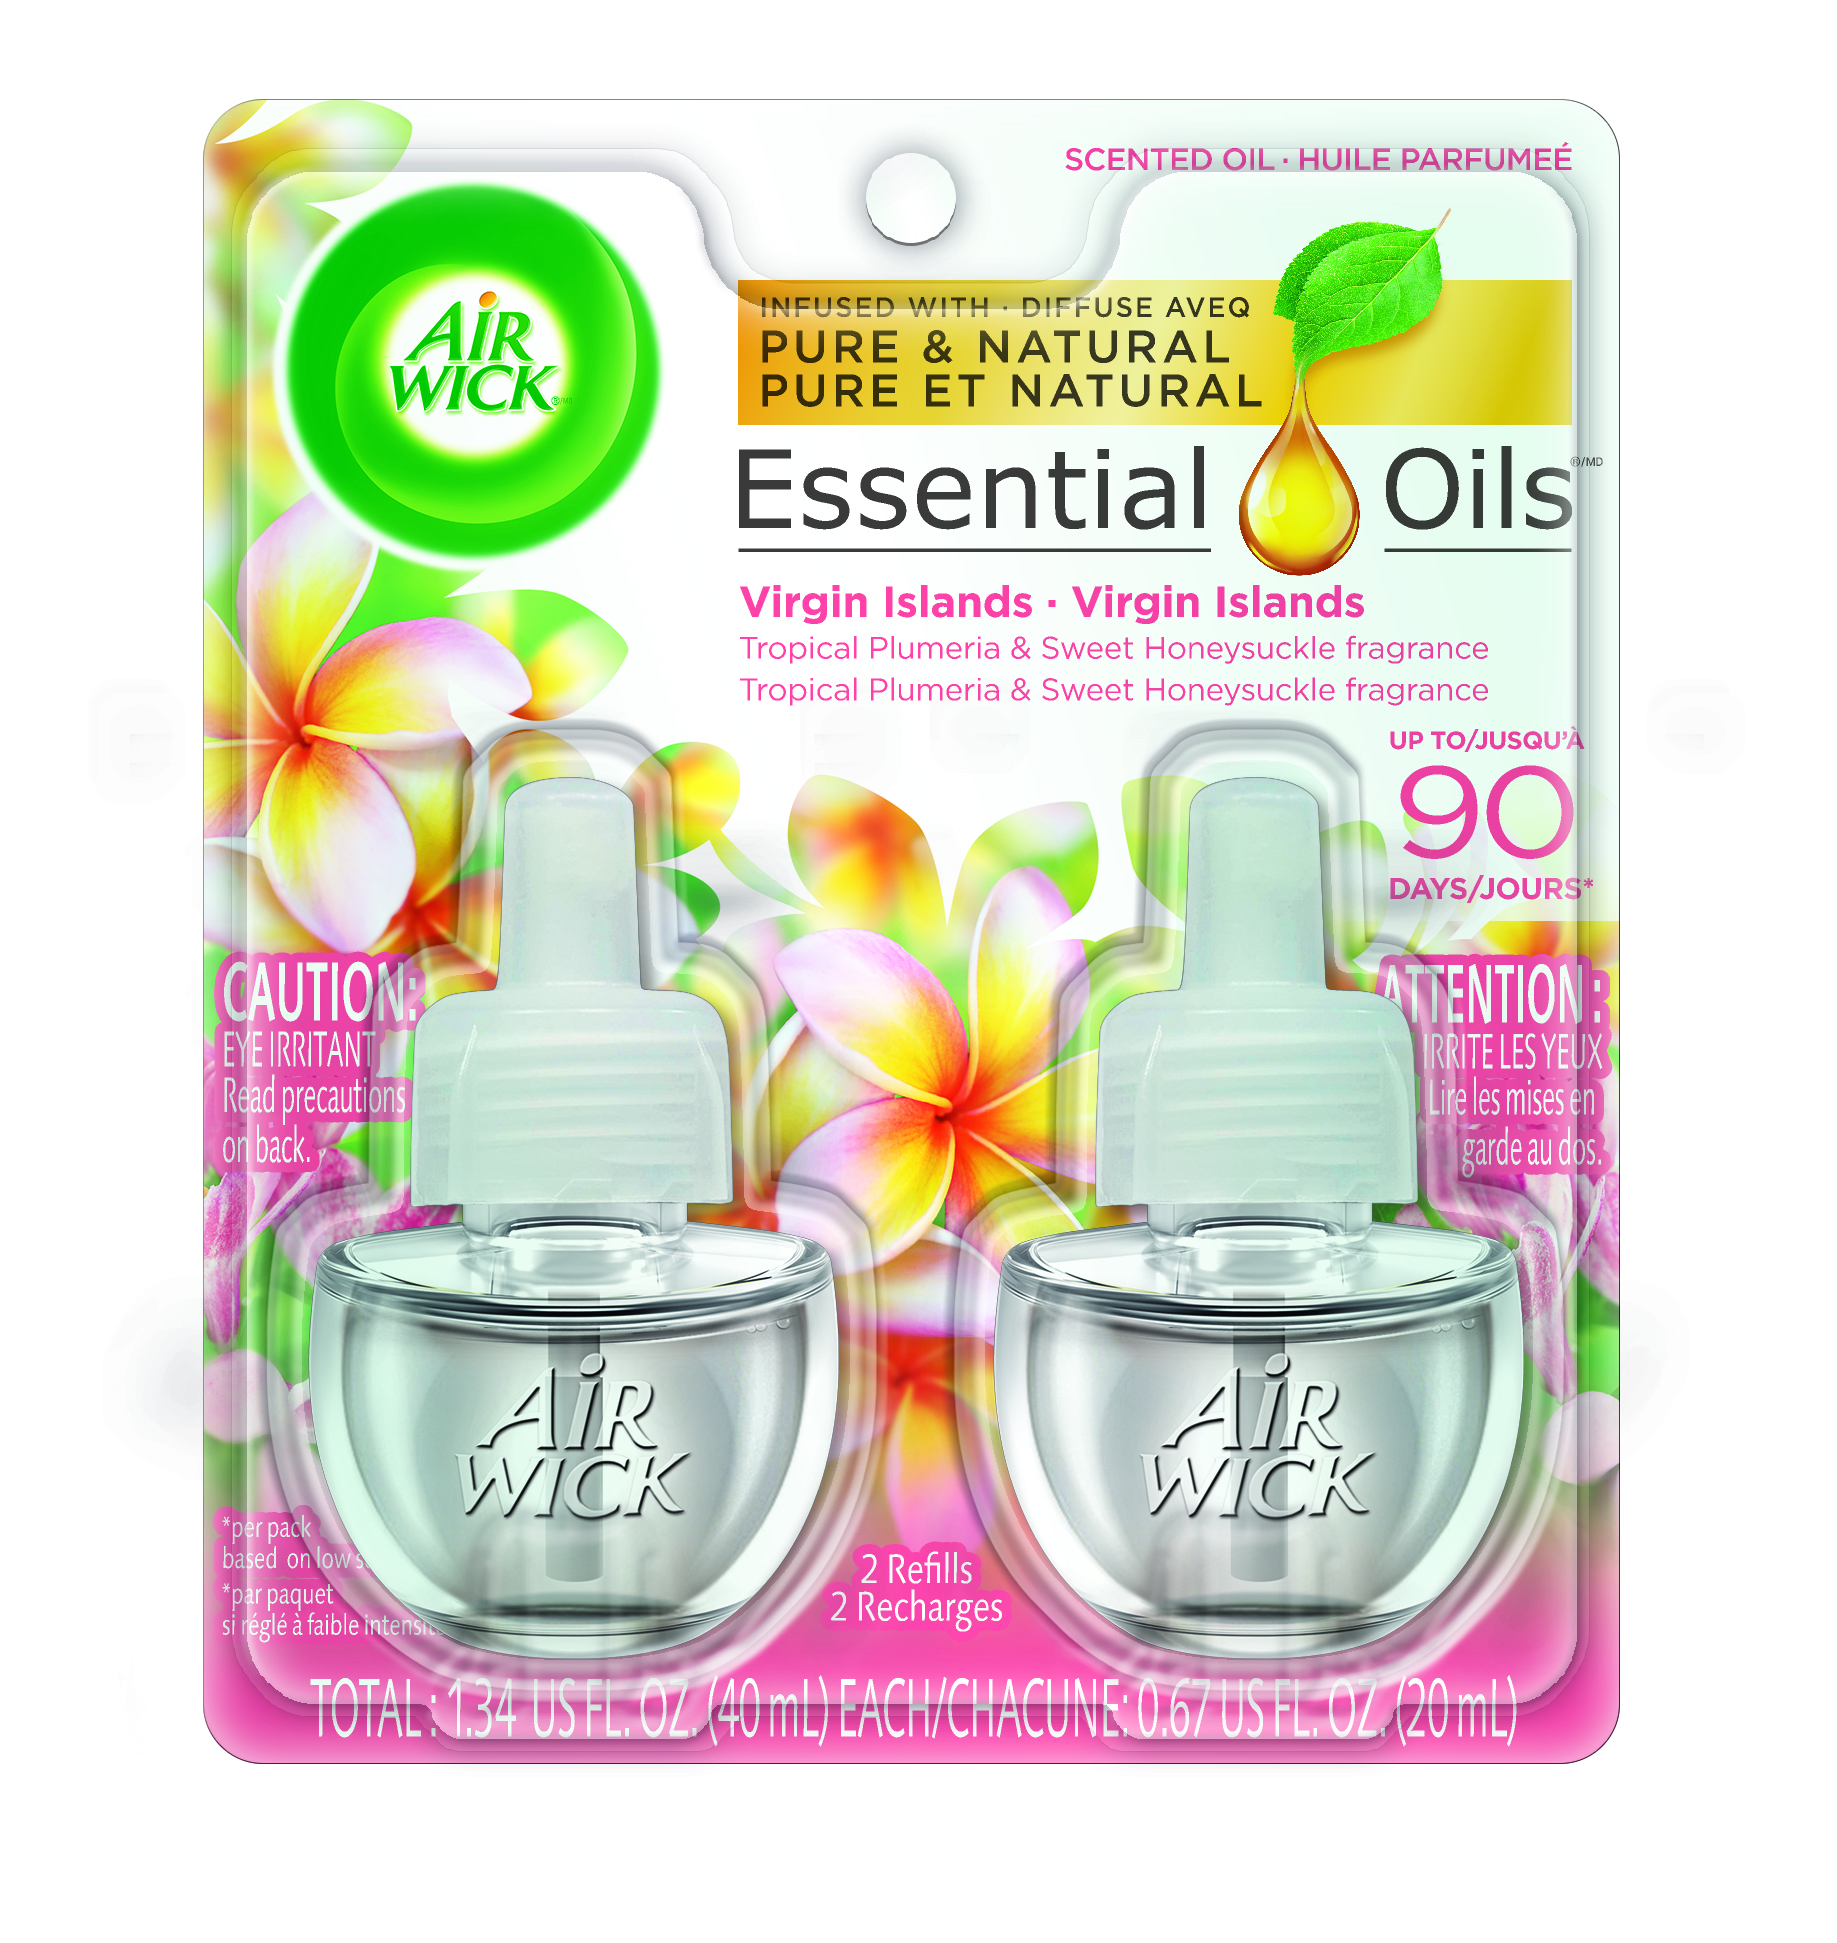 AIR WICK Scented Oil  Virgin Islands National Parks Discontinued